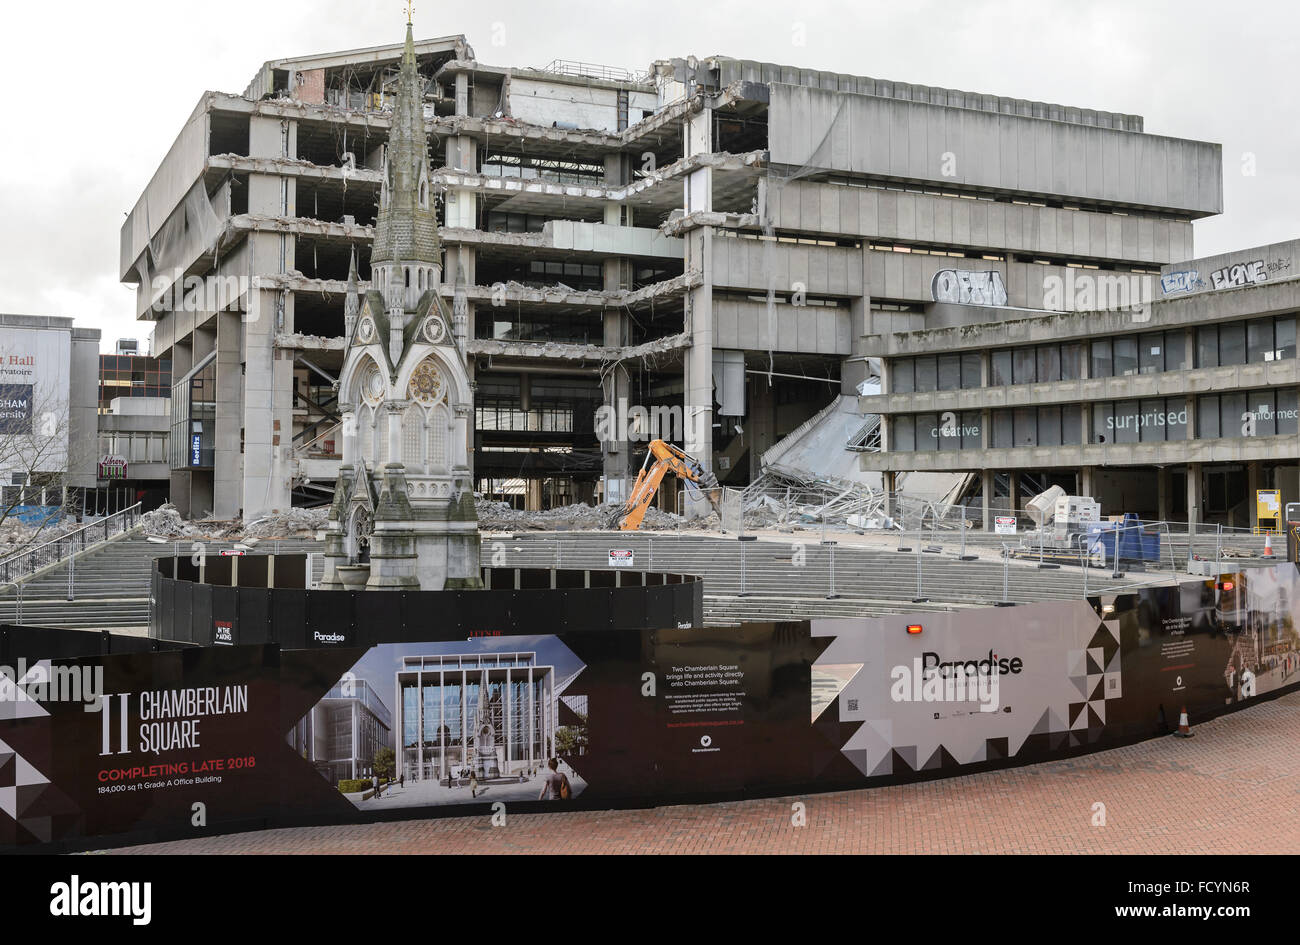 Demolition of the Central Library in Paradise Circus/ Chamberlain Square in Birmingham City Centre. Stock Photo